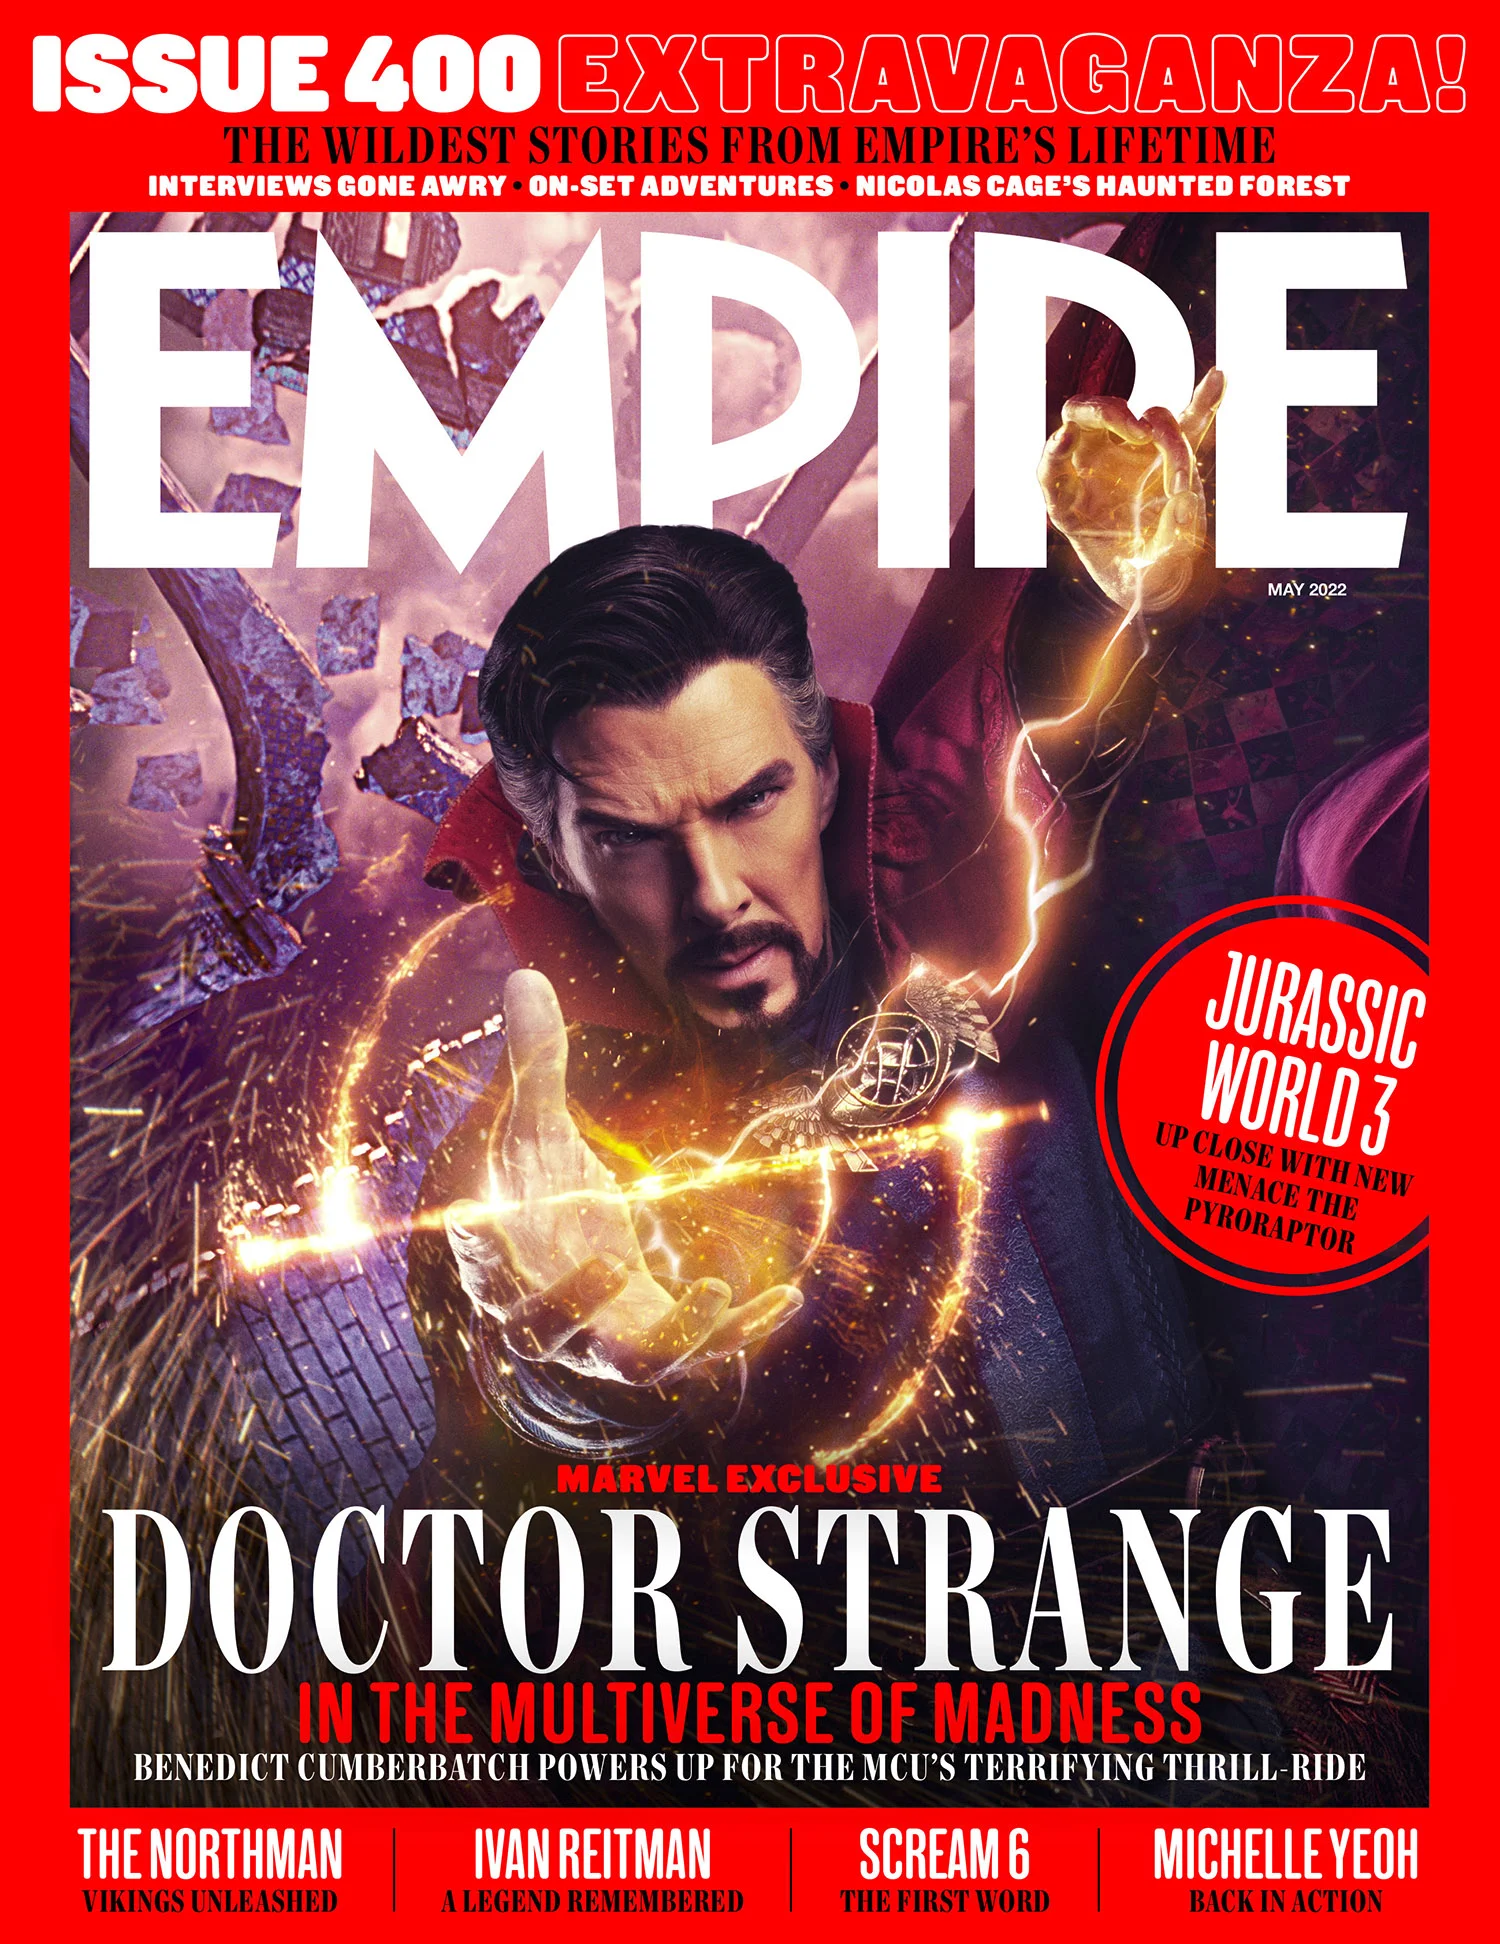 "Doctor Strange in the Multiverse of Madness" on the cover of "Empire" magazine